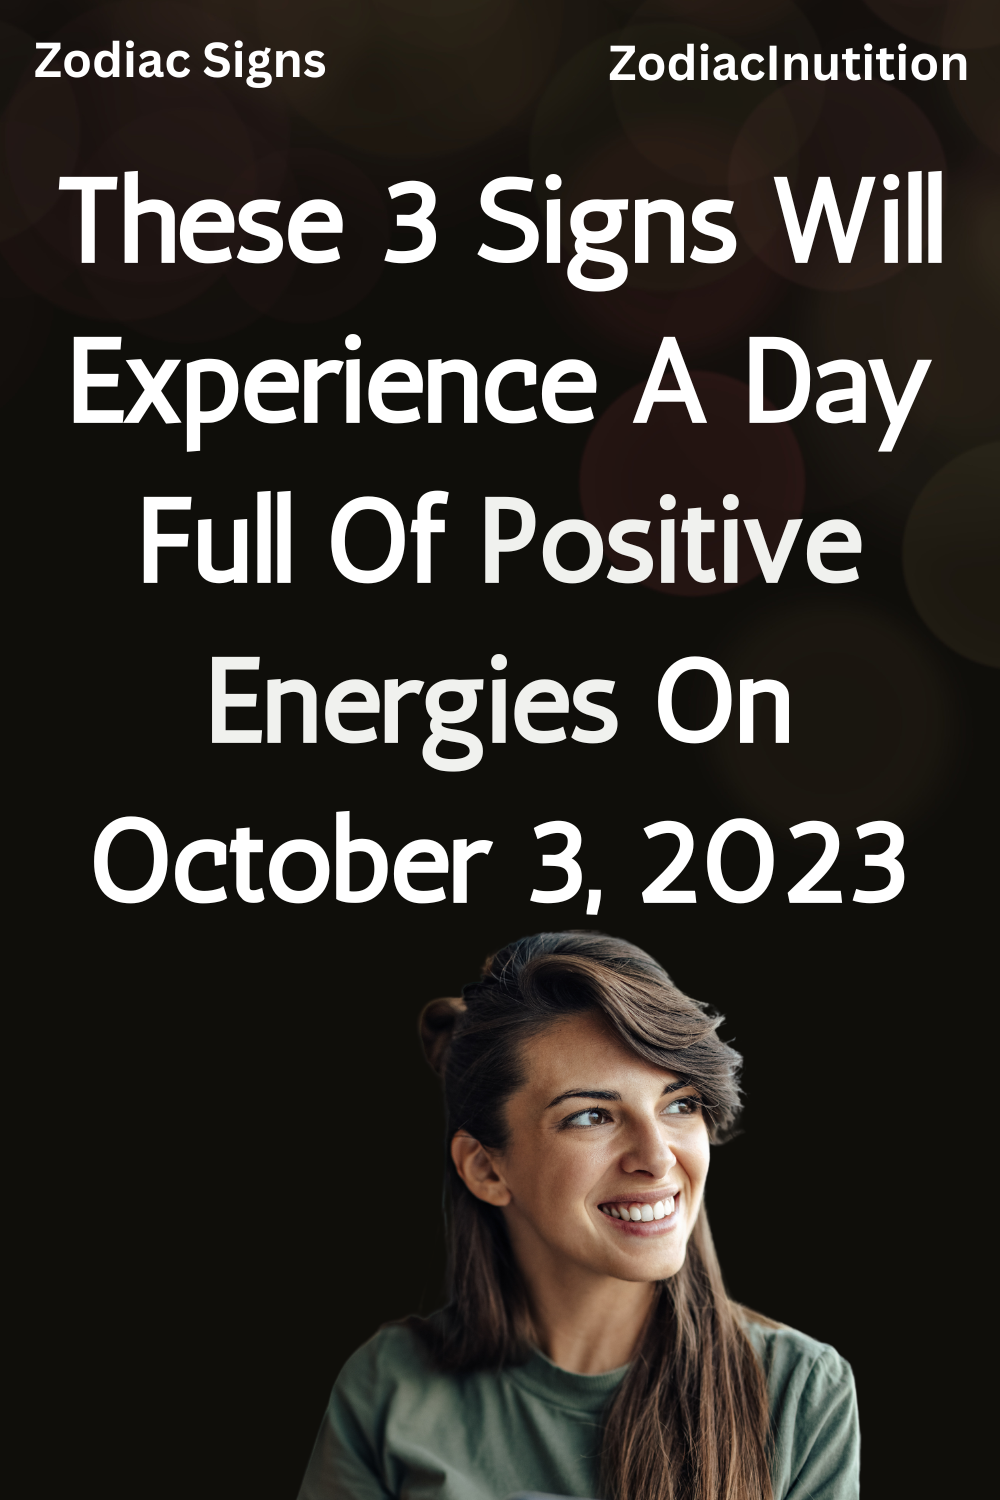 These 3 Signs Will Experience A Day Full Of Positive Energies On October 3, 2023